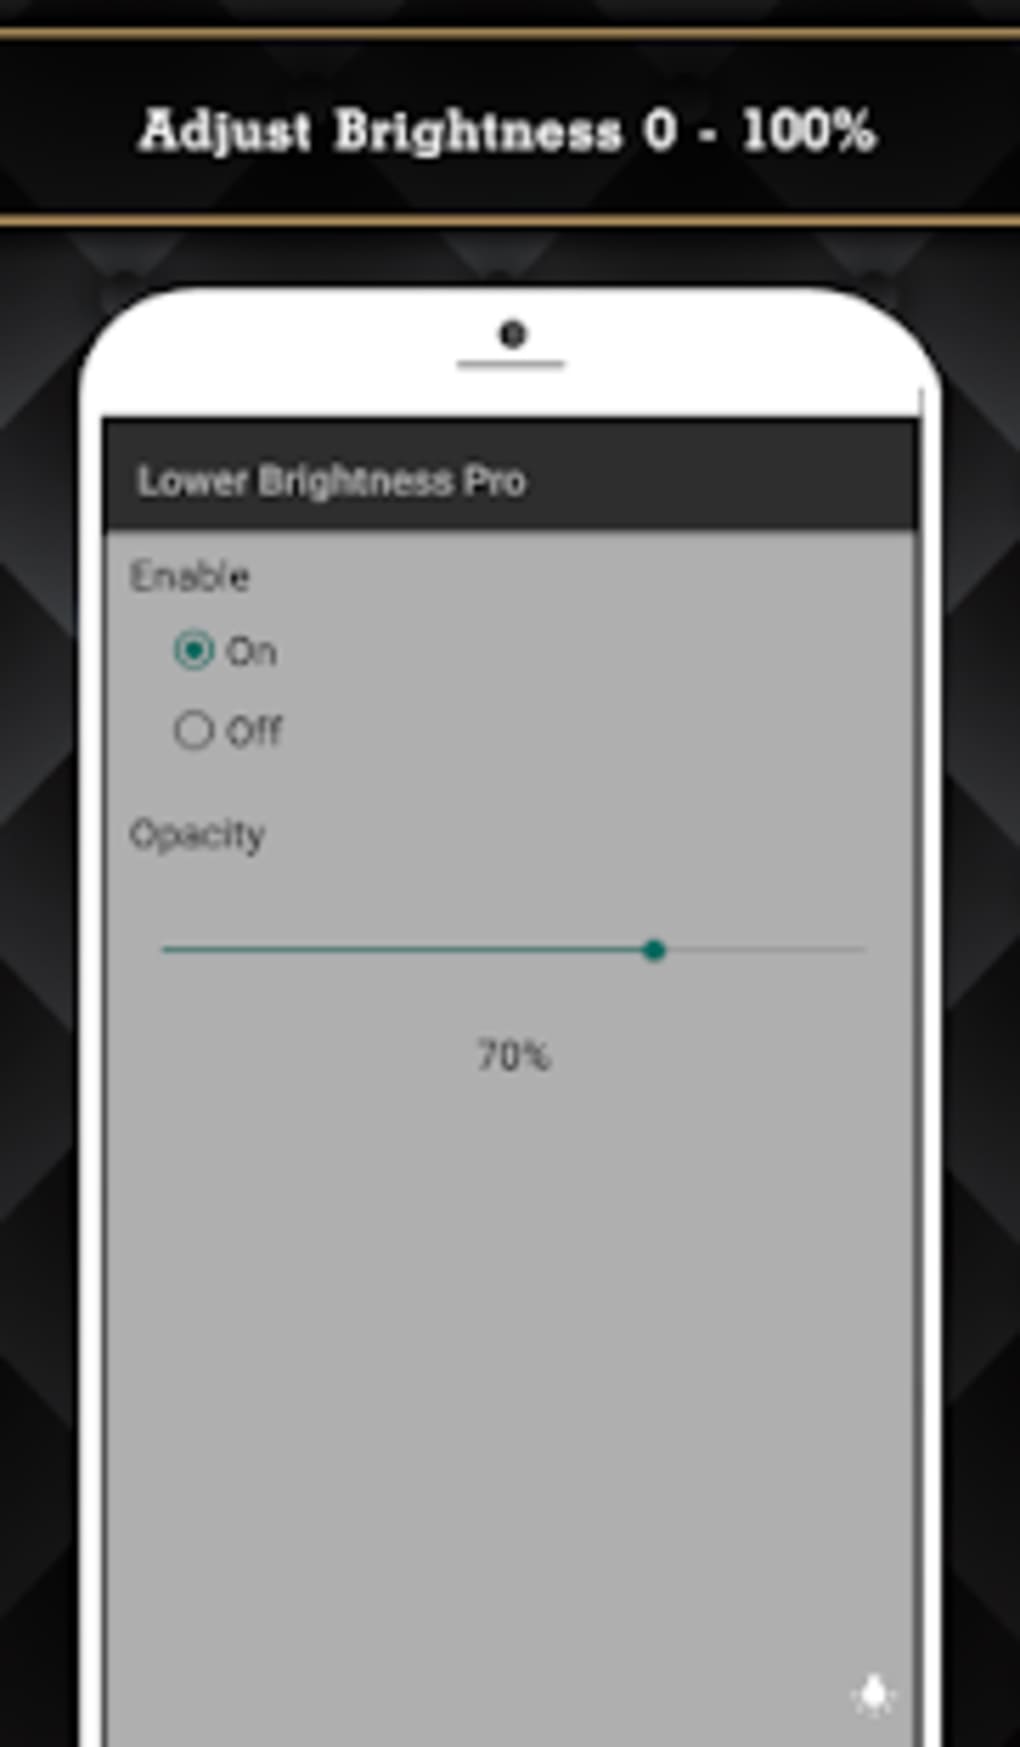 Lower Brightness Screen Filter Pro for Android - Download Android